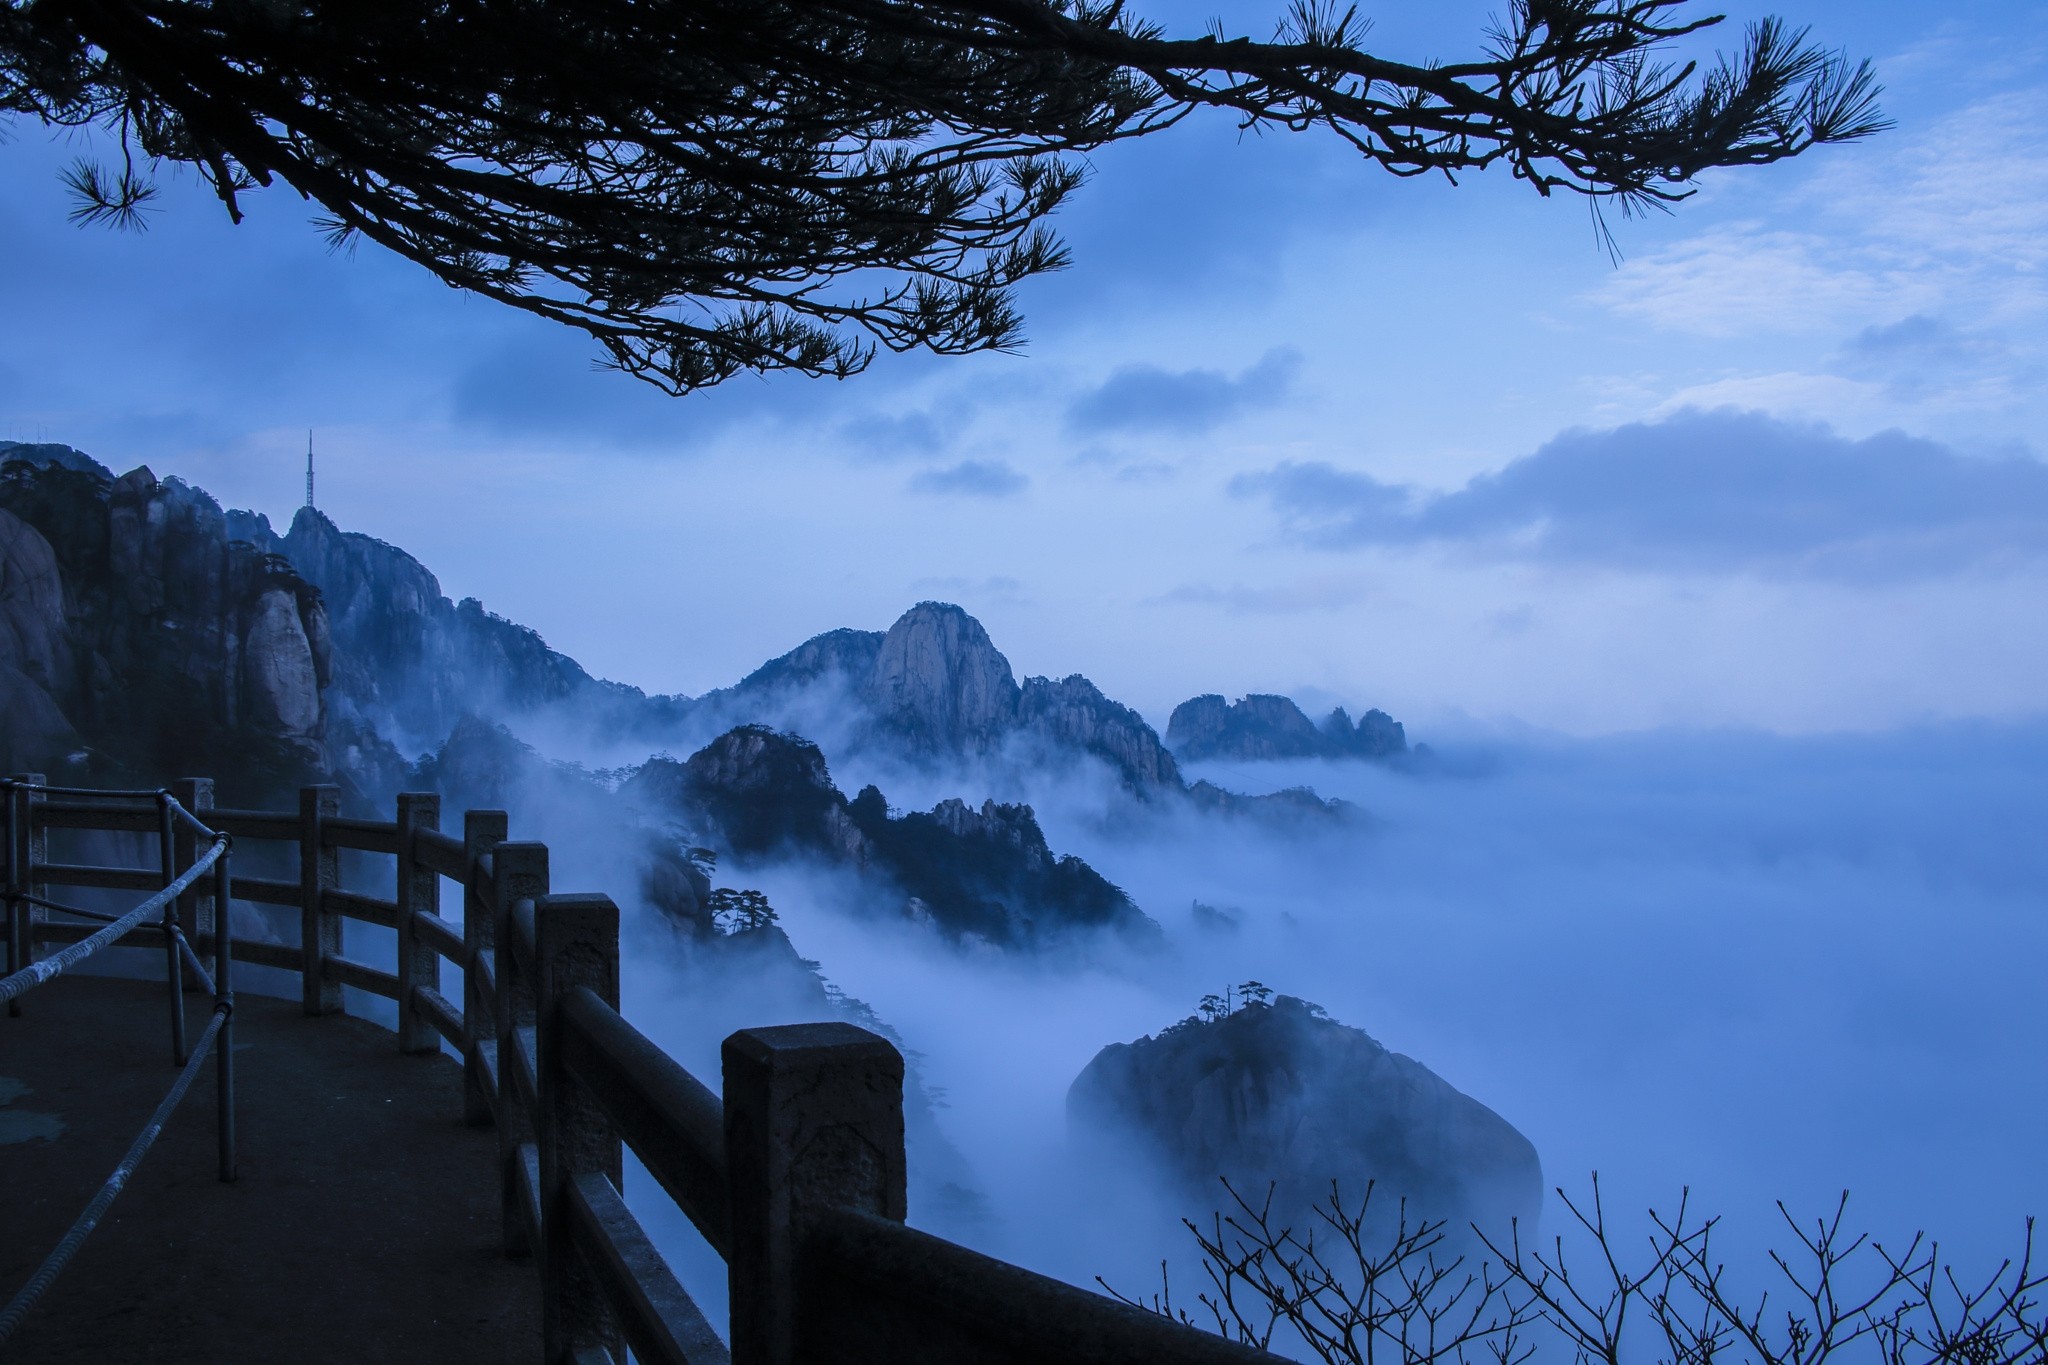 General 2048x1365 nature landscape mist mountains walkway morning blue trees China Asia